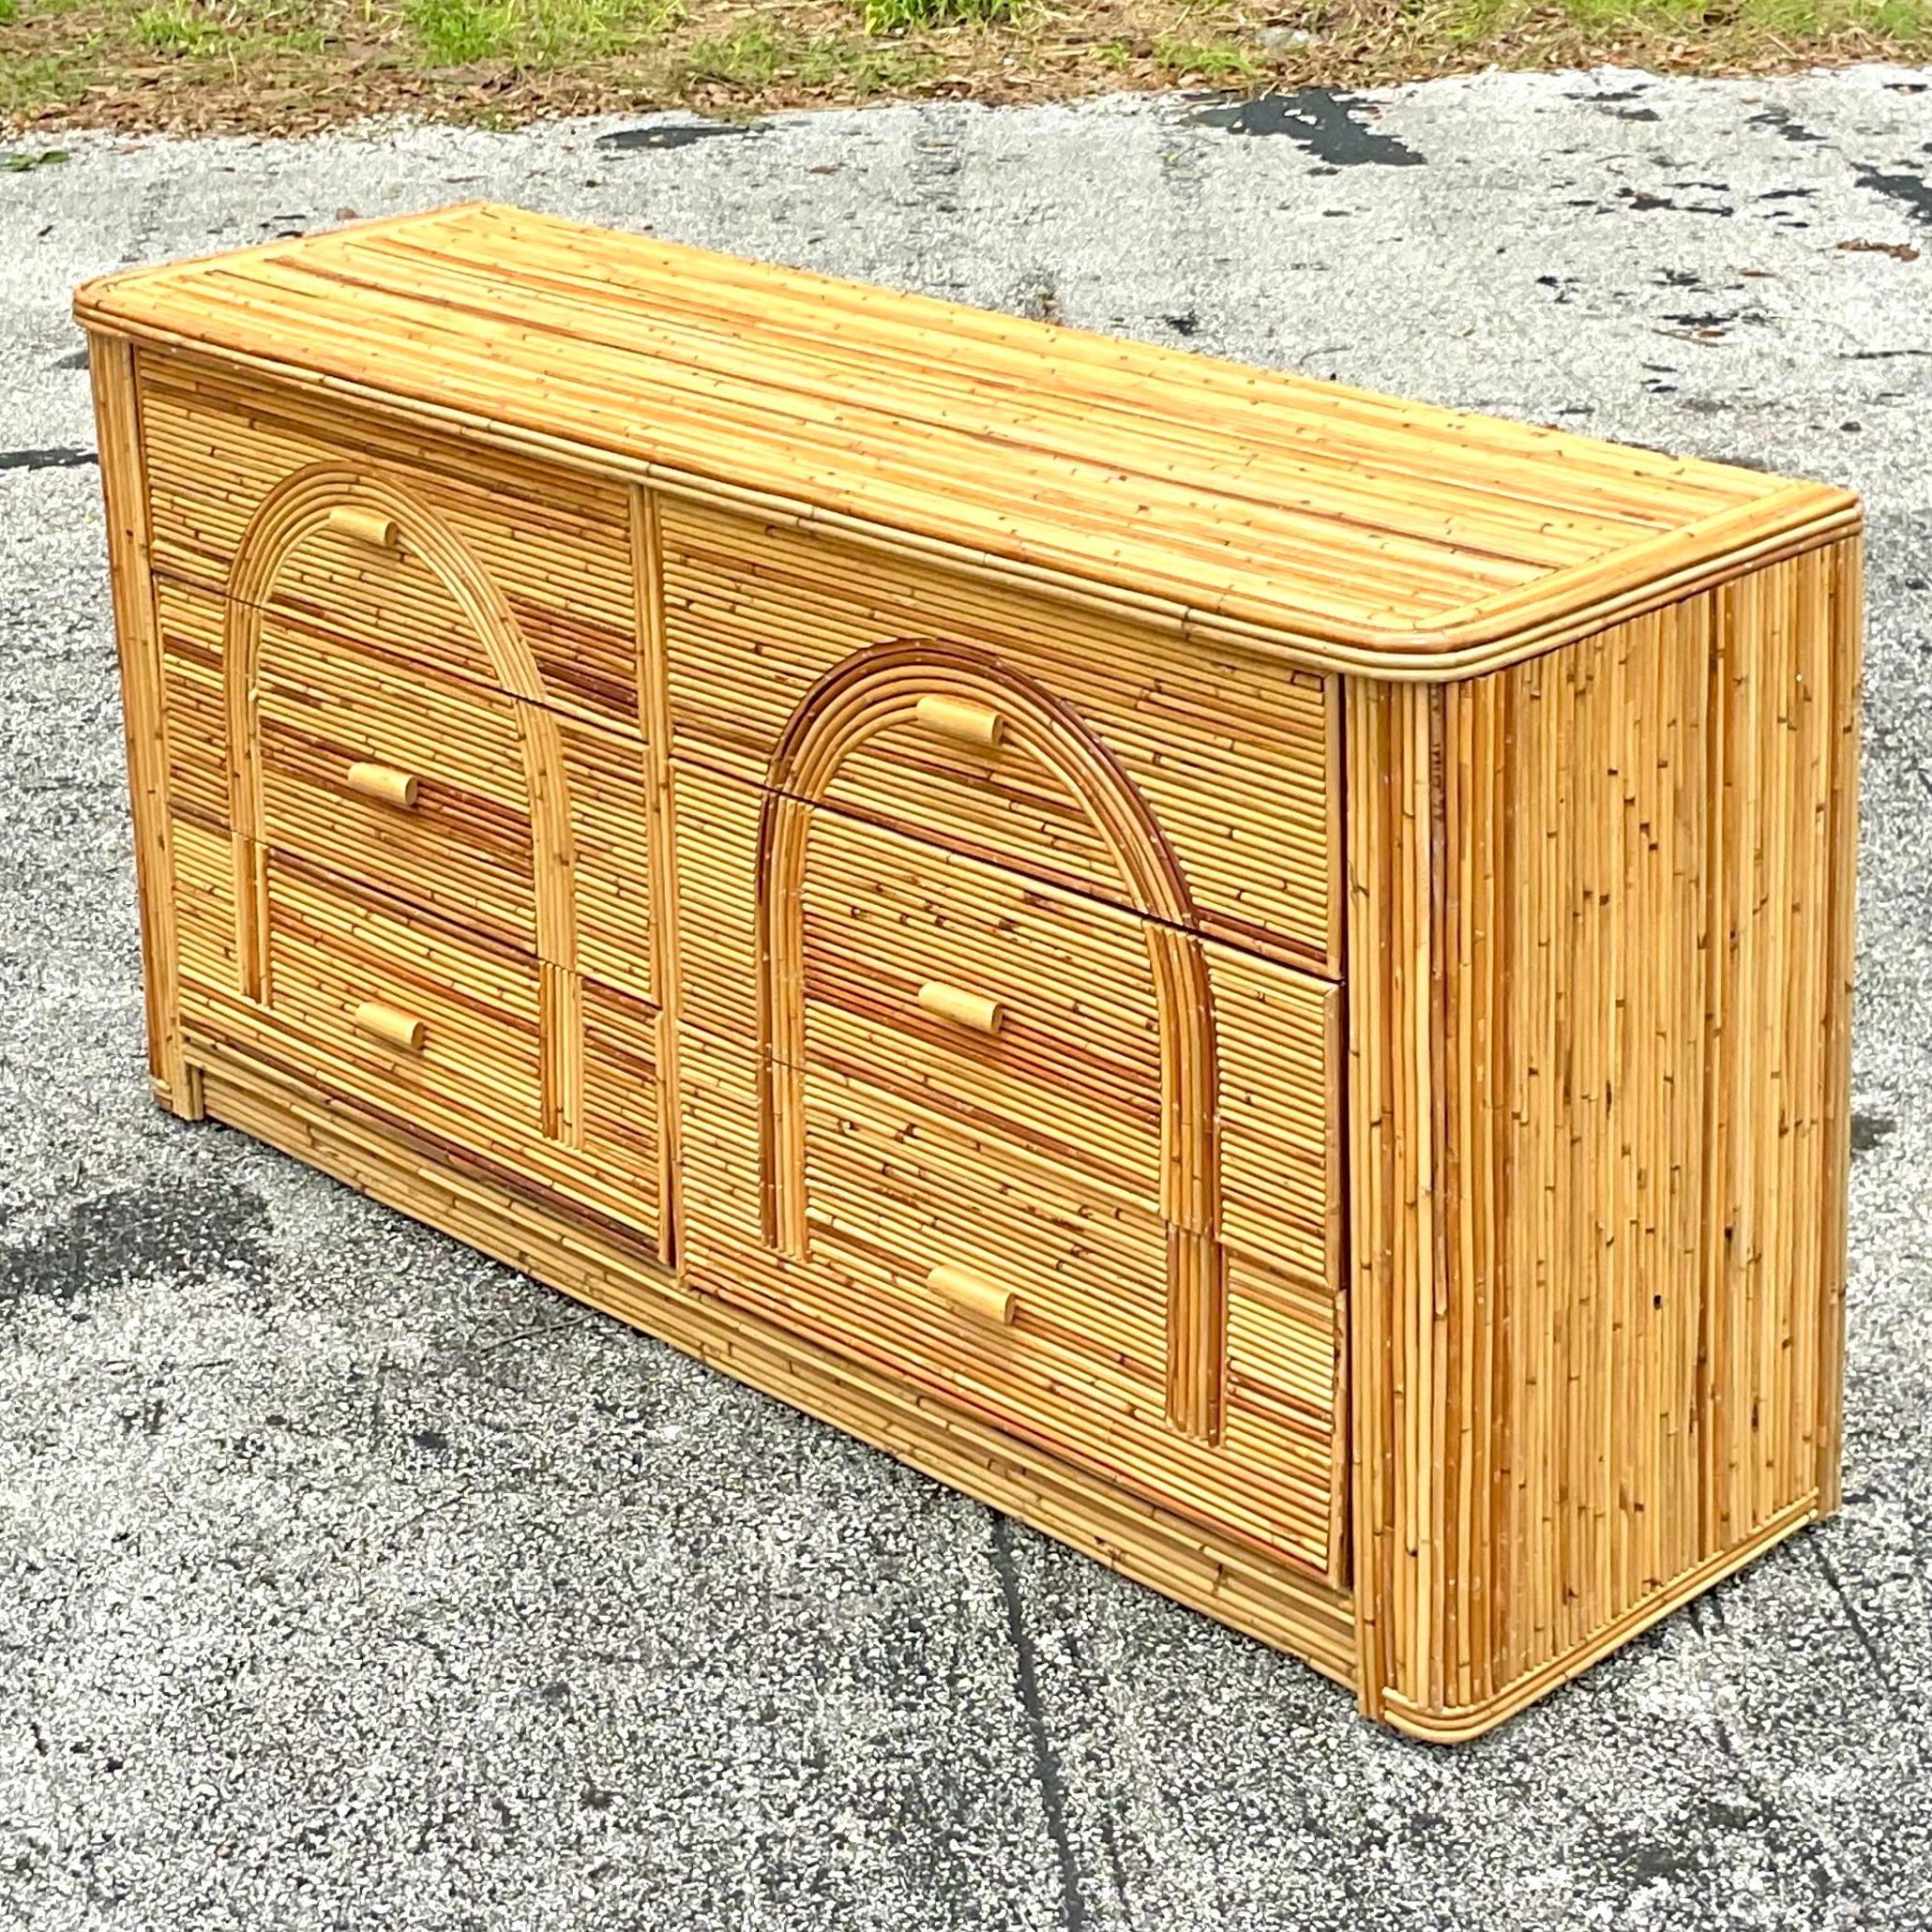 A fabulous vintage Coastal standard dresser. Beautiful pencil reed cabinet with six roomy drawers. Chic arched design in the drawer fronts. Acquired from a Palm Beach estate. 